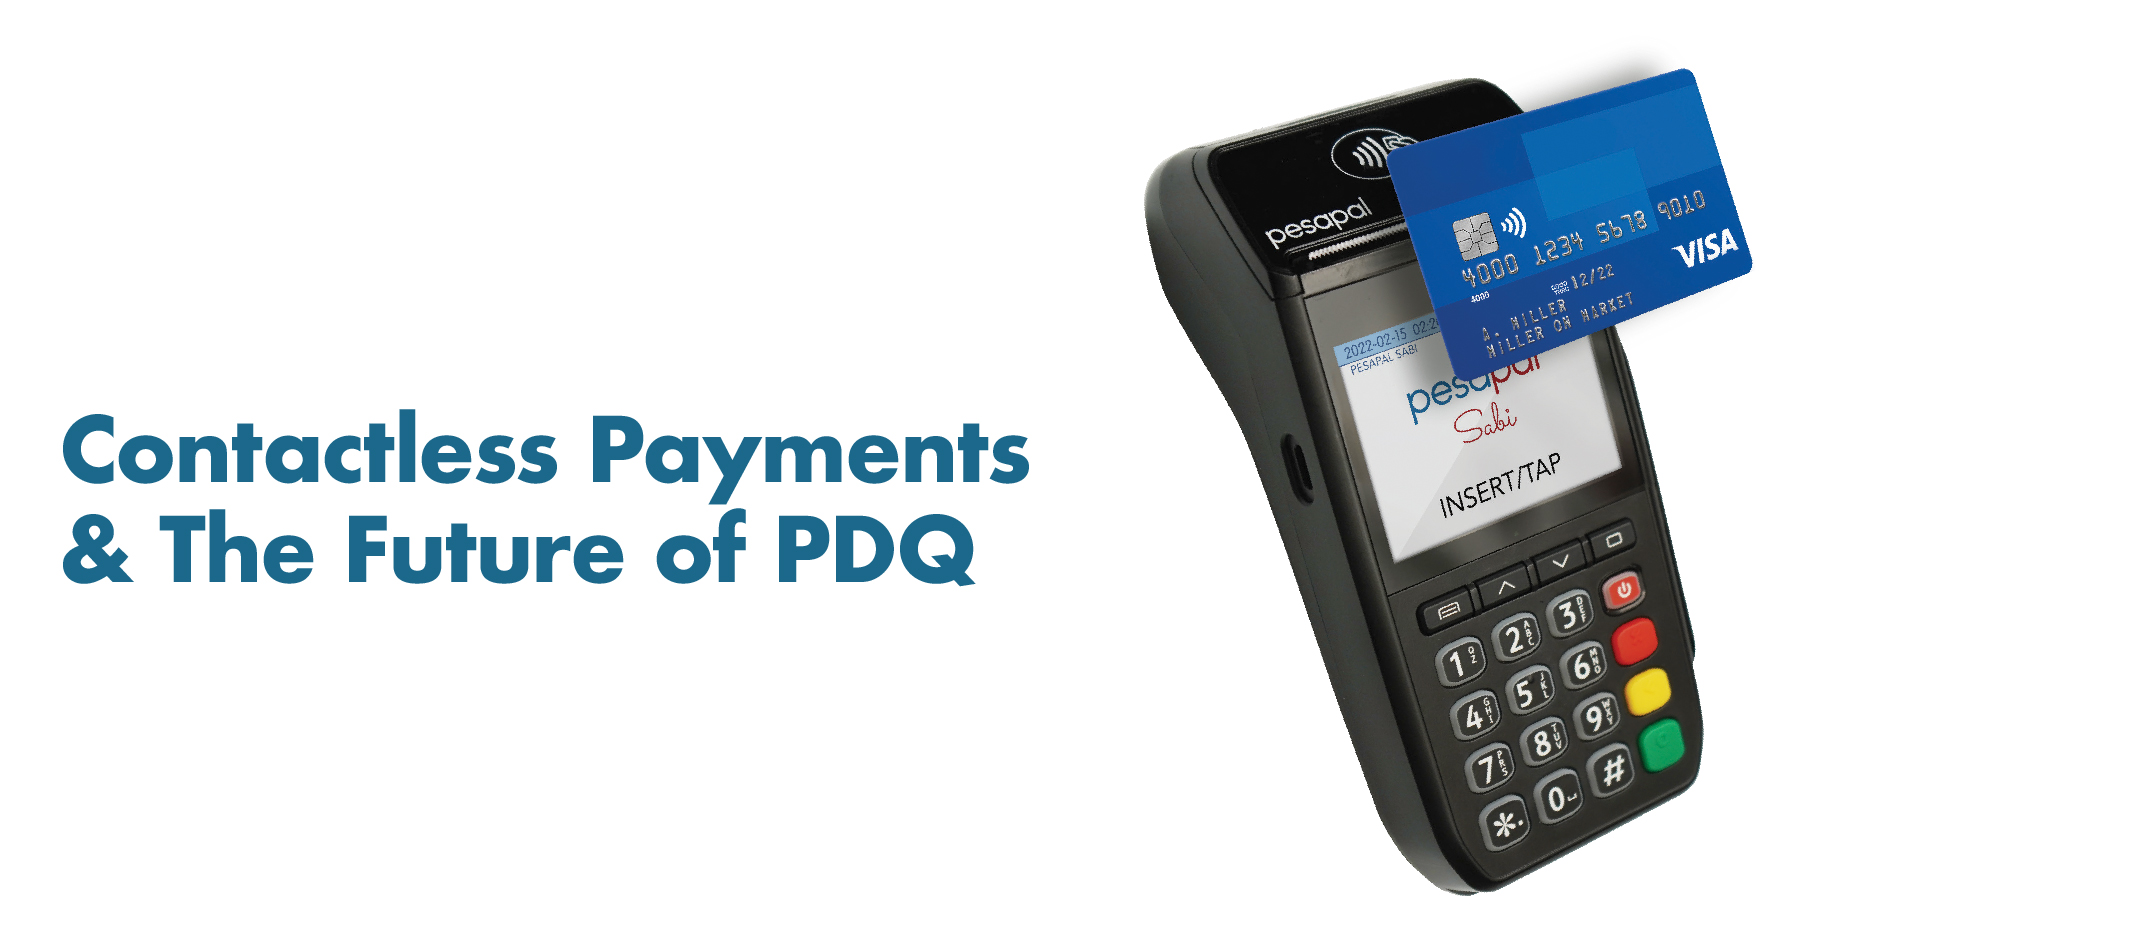 Contactless Payments and the Future of PDQ: What Retailers Need to Know